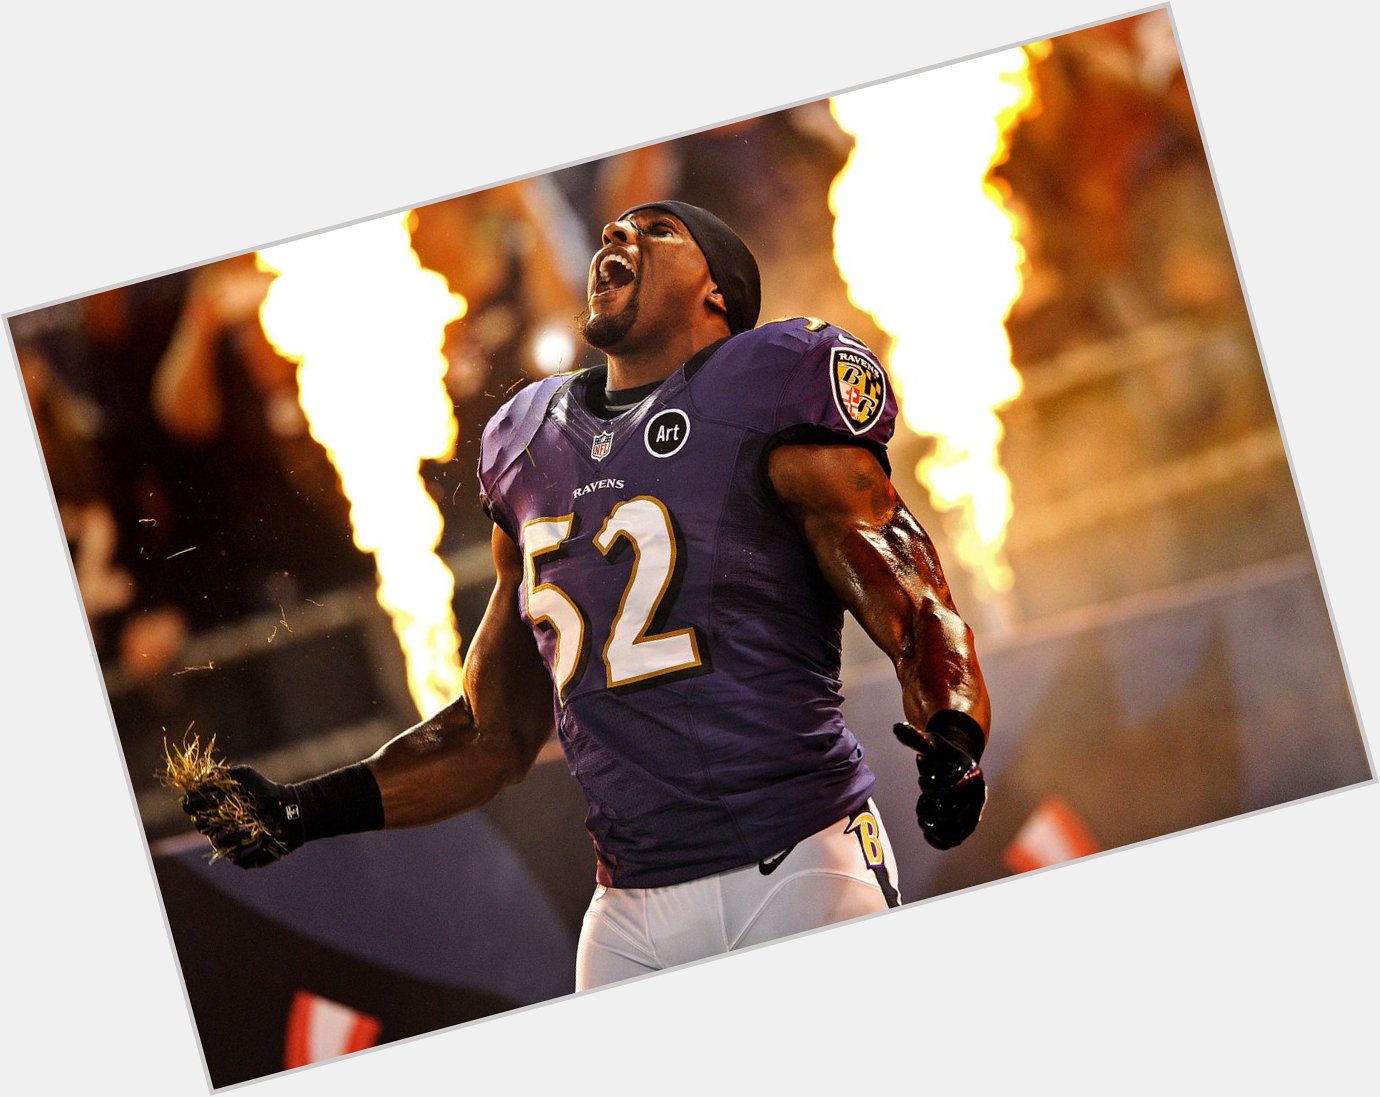 Happy birthday, Ray Lewis! He is the only player in history with 40+ sacks and 30+ INTs 